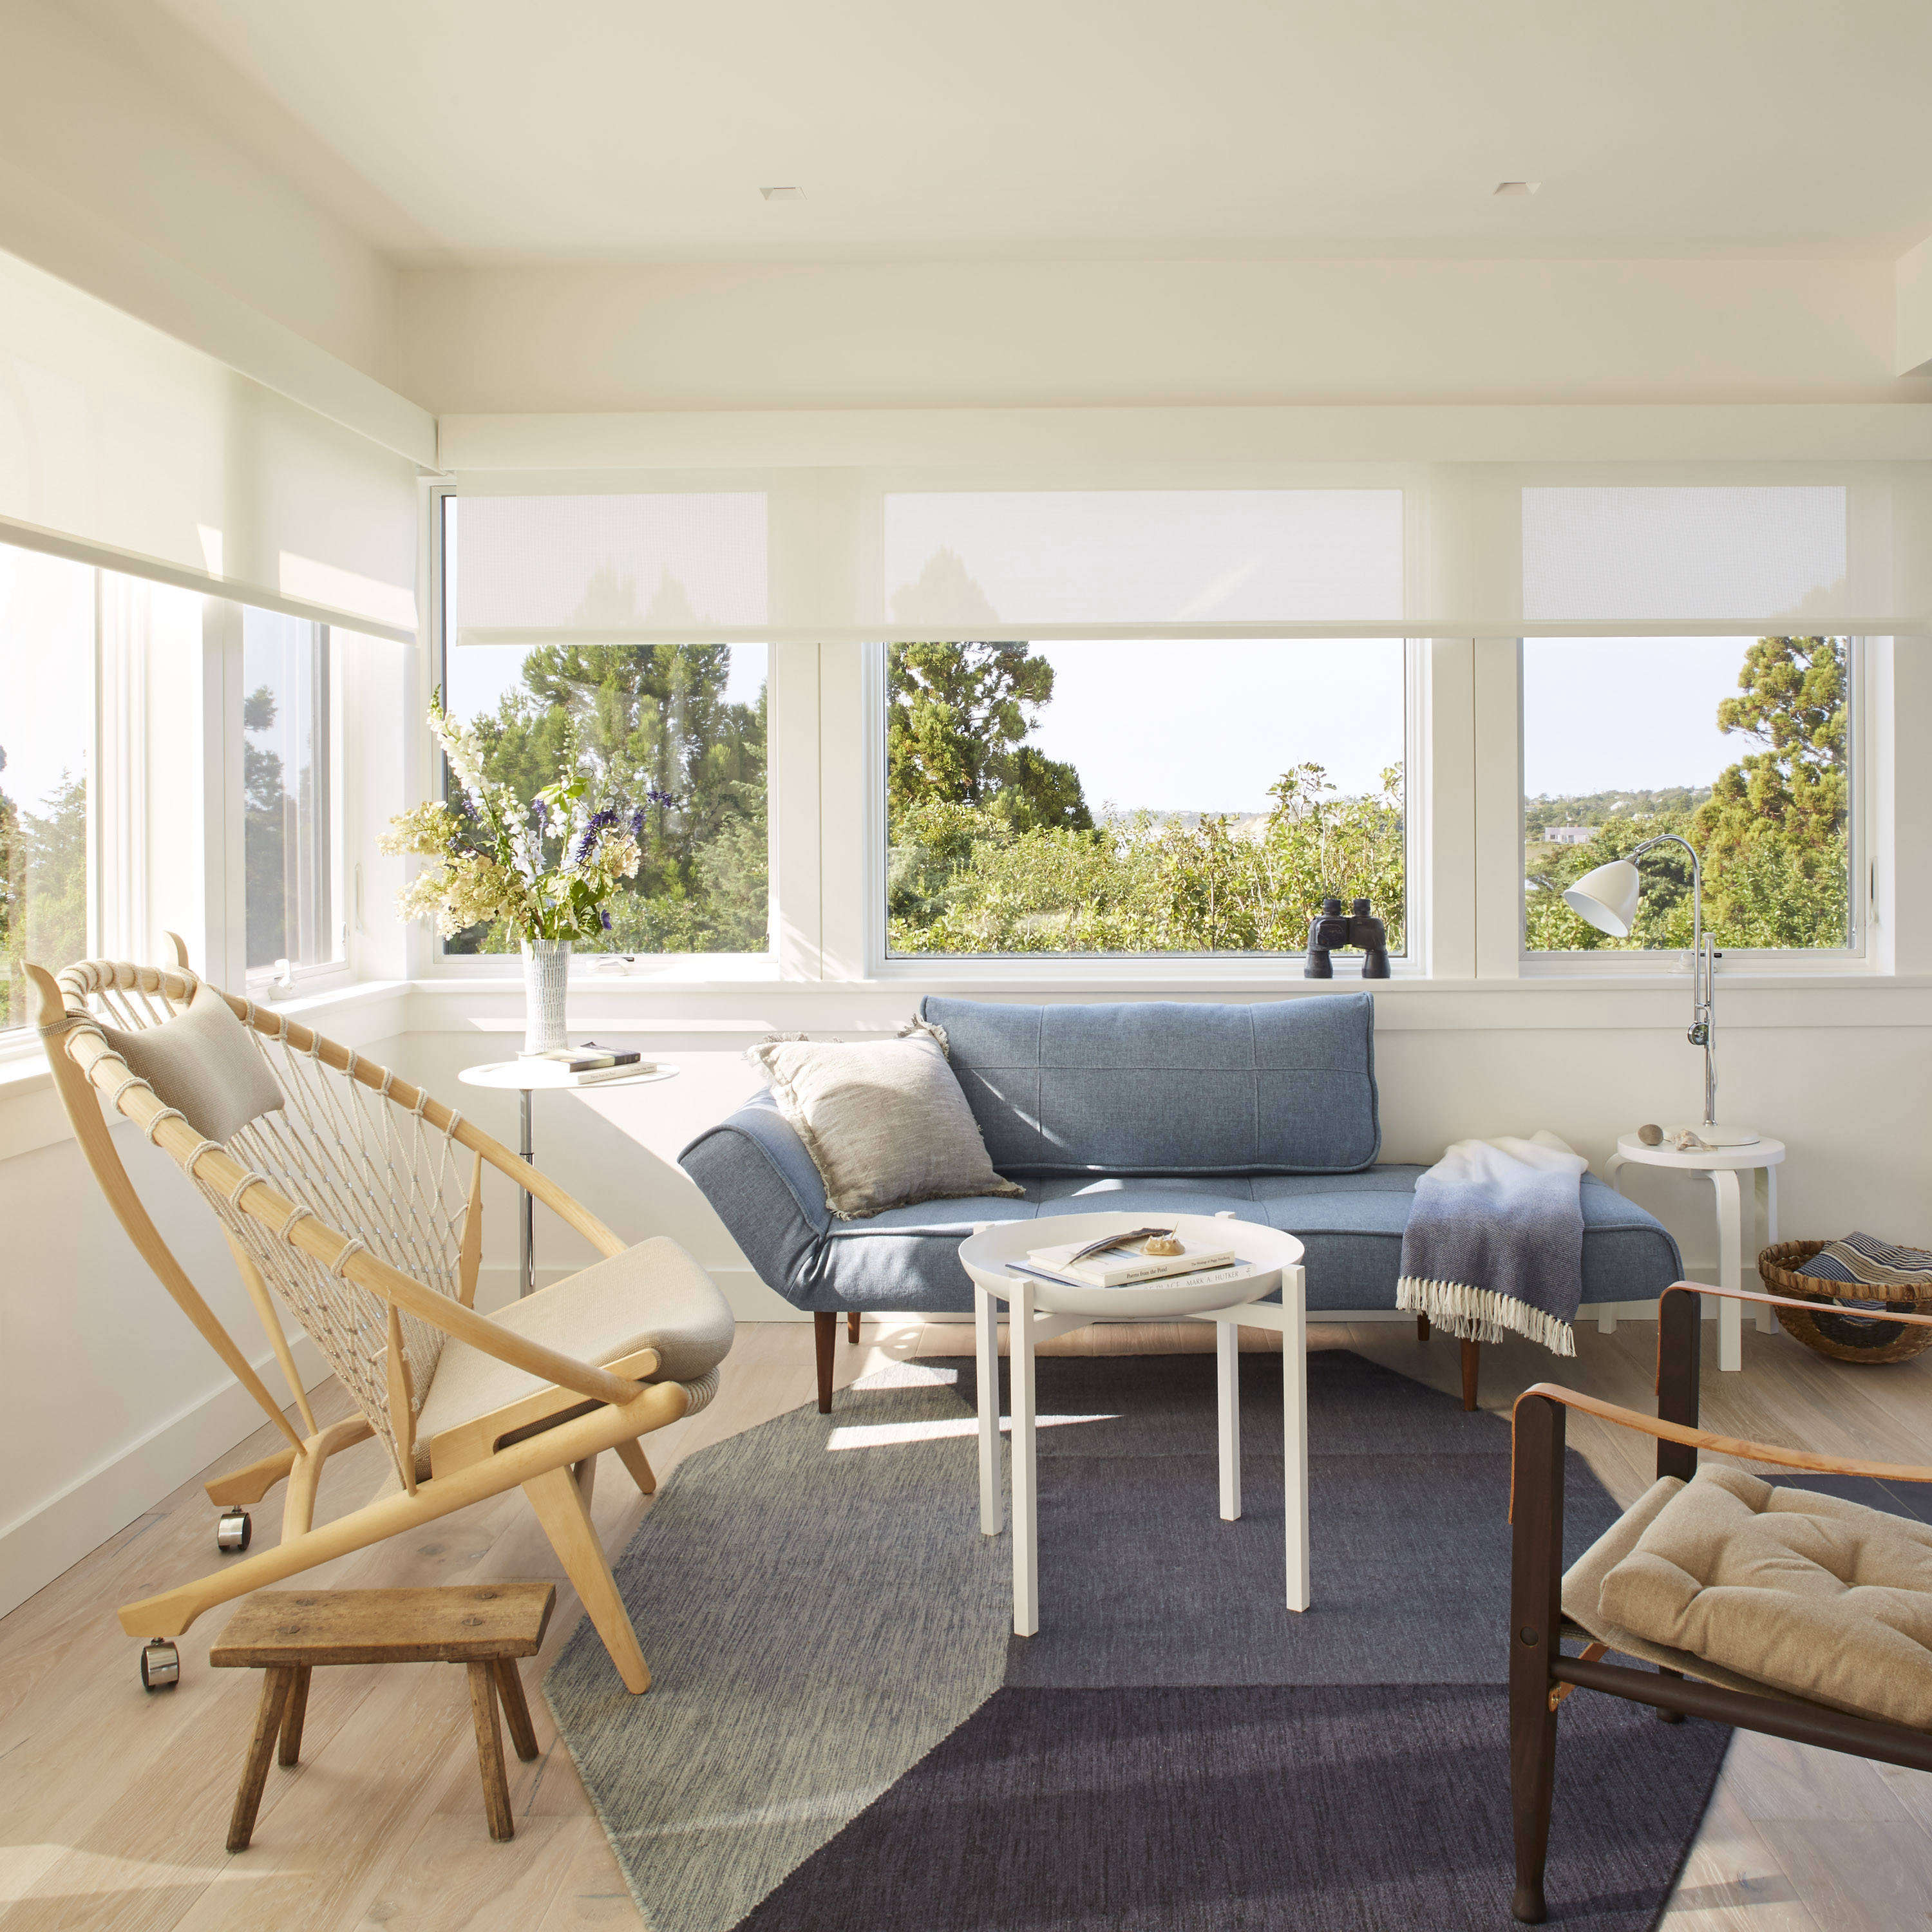 10 Modern Wood Beach Houses from the Remodelista ArchitectDesigner Directory portrait 5